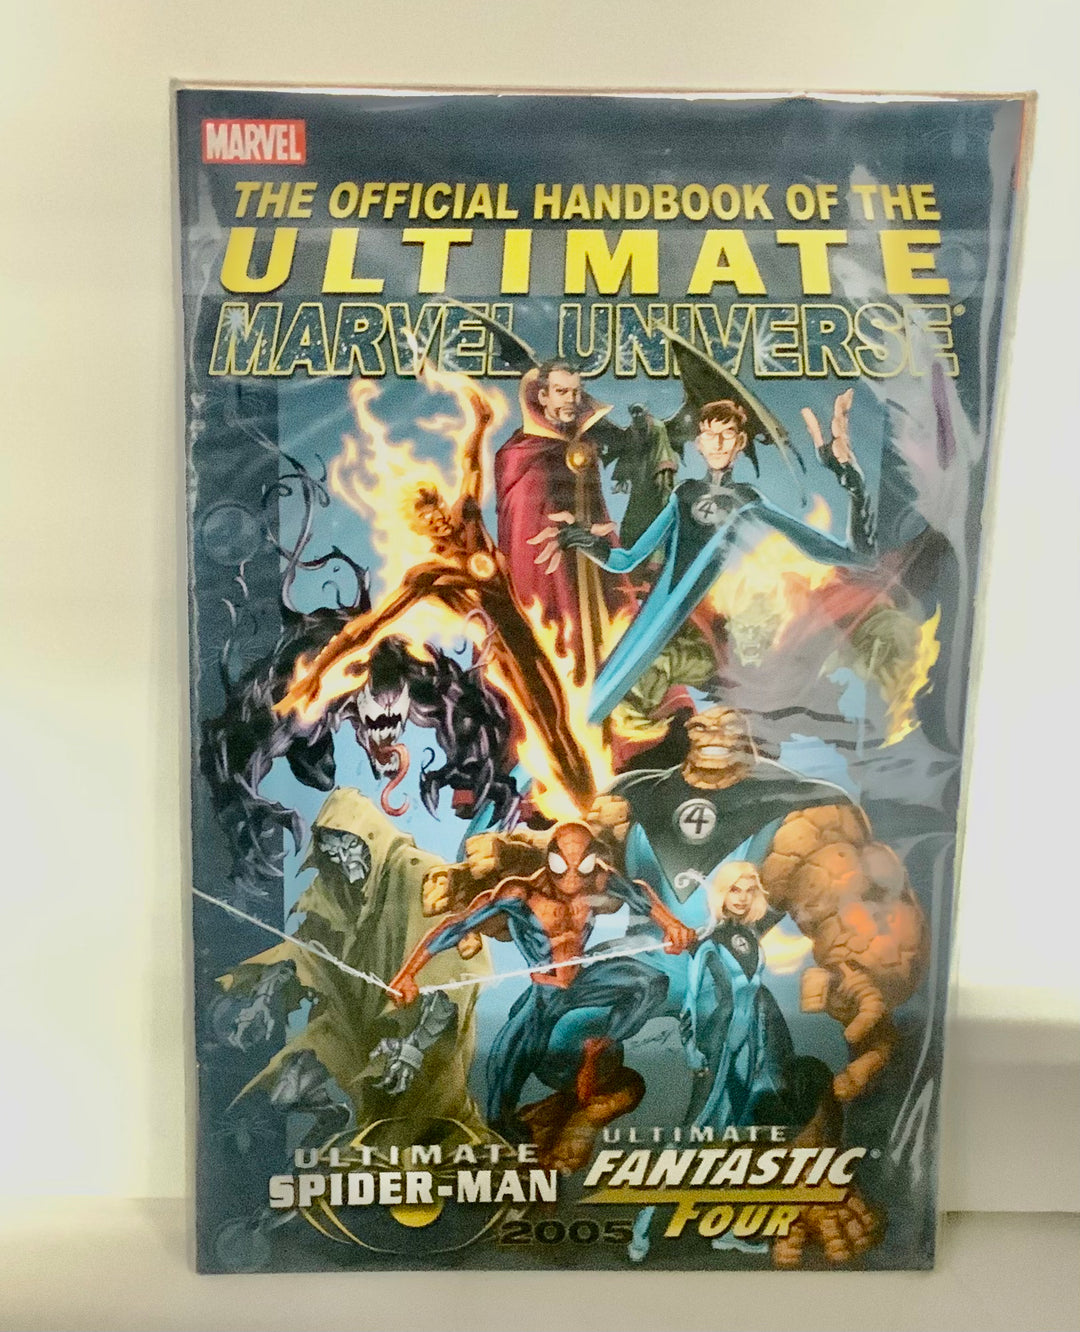 The Official Handbook Of The Ultimate Marvel Universe: Spider-Man Fantastic Four